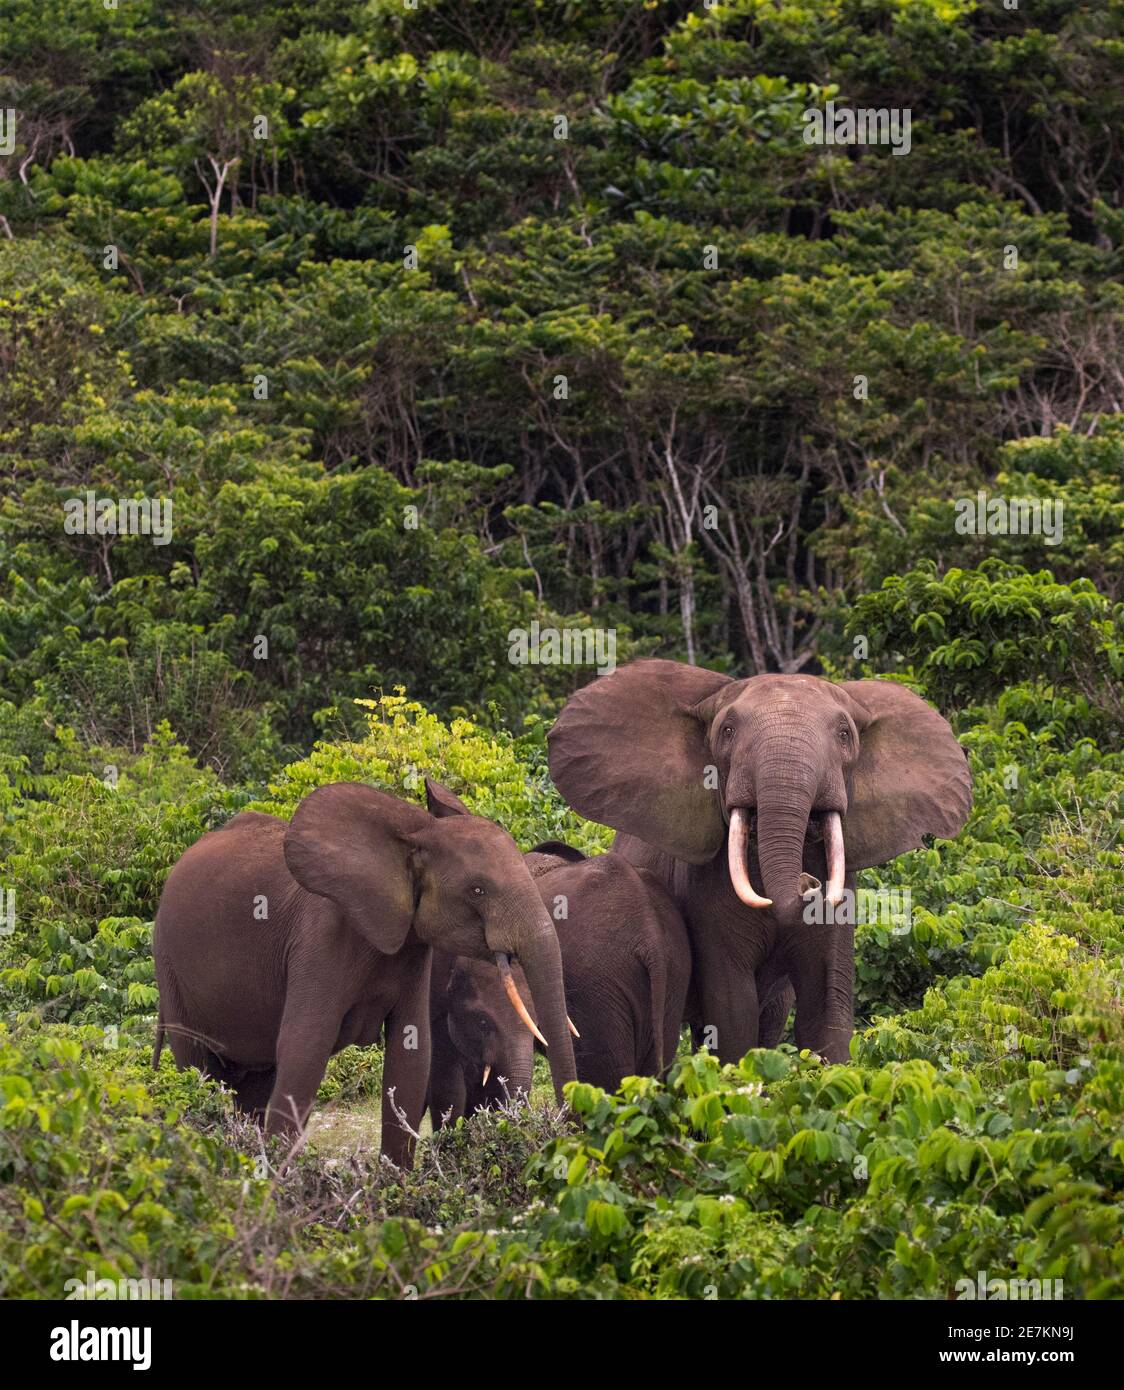 African forest elephant (Loxodonta cyclotis), family in tight protective formation with young in centre, Loango National Park, Gabon. Stock Photo